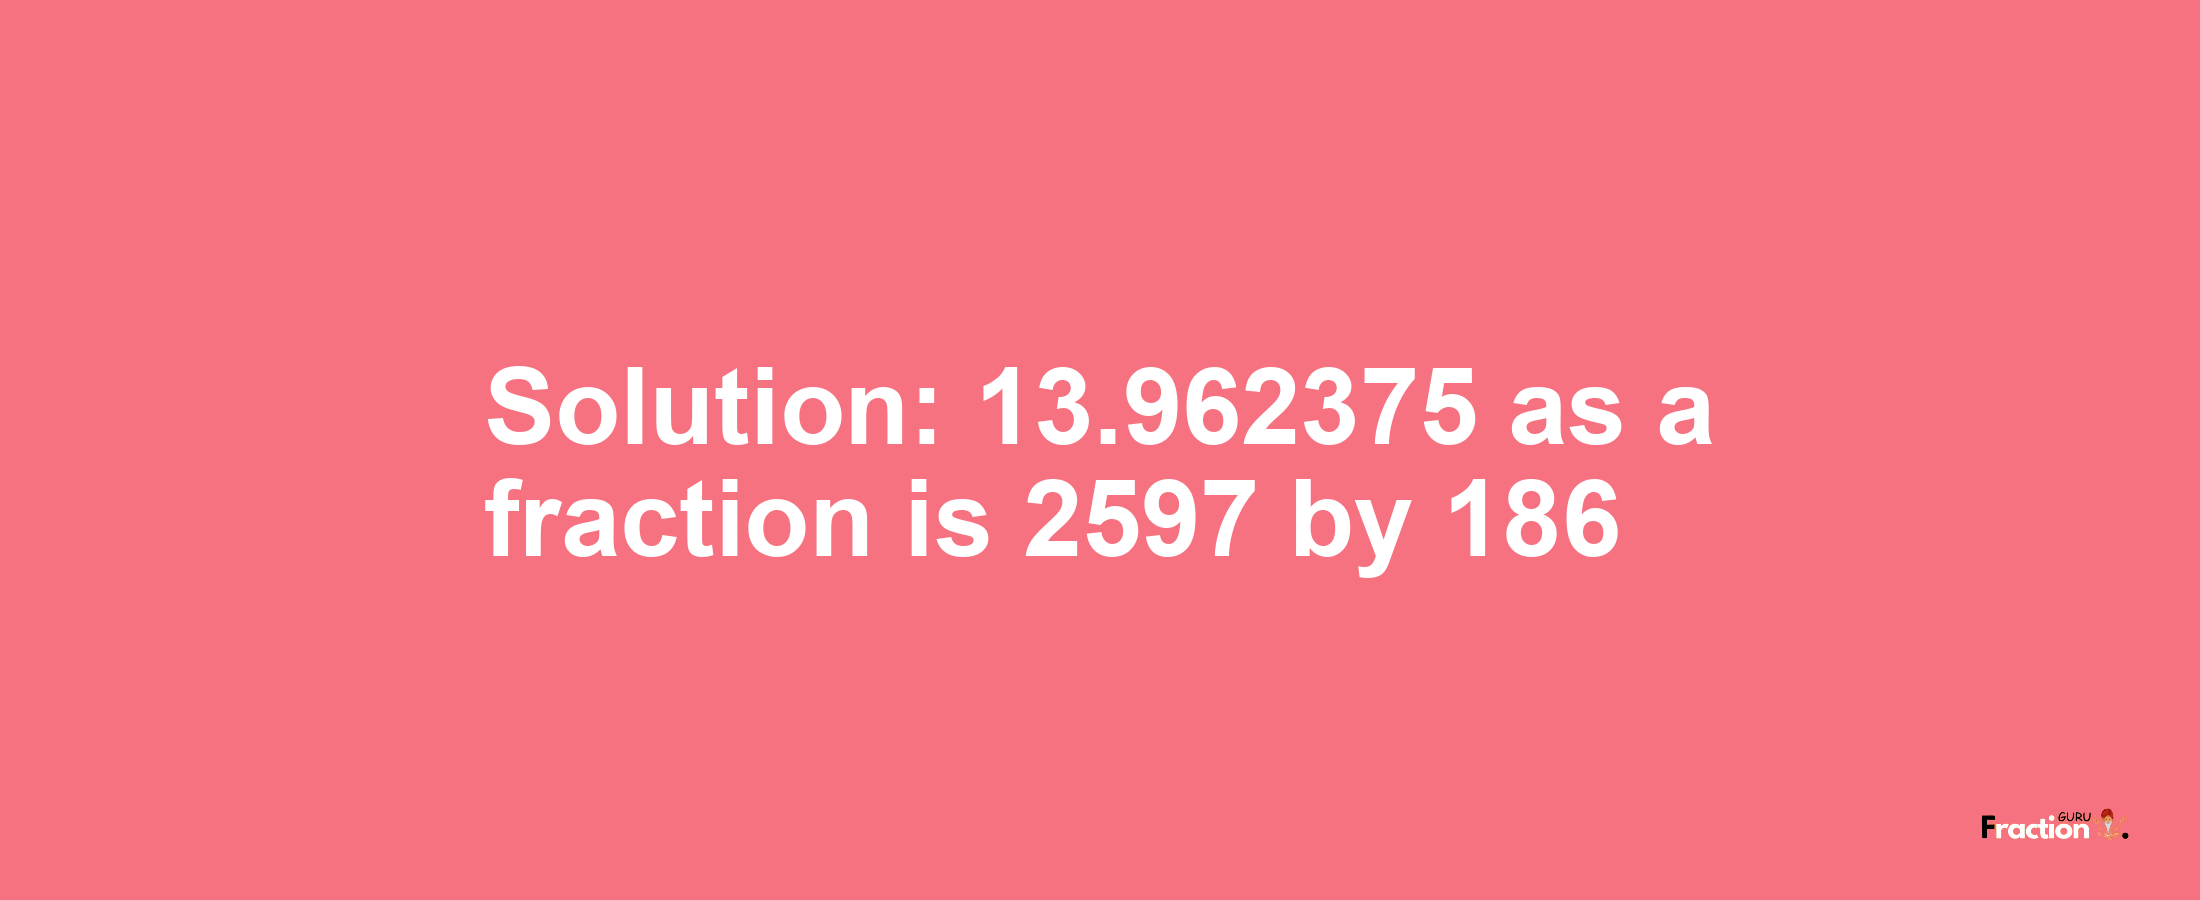 Solution:13.962375 as a fraction is 2597/186